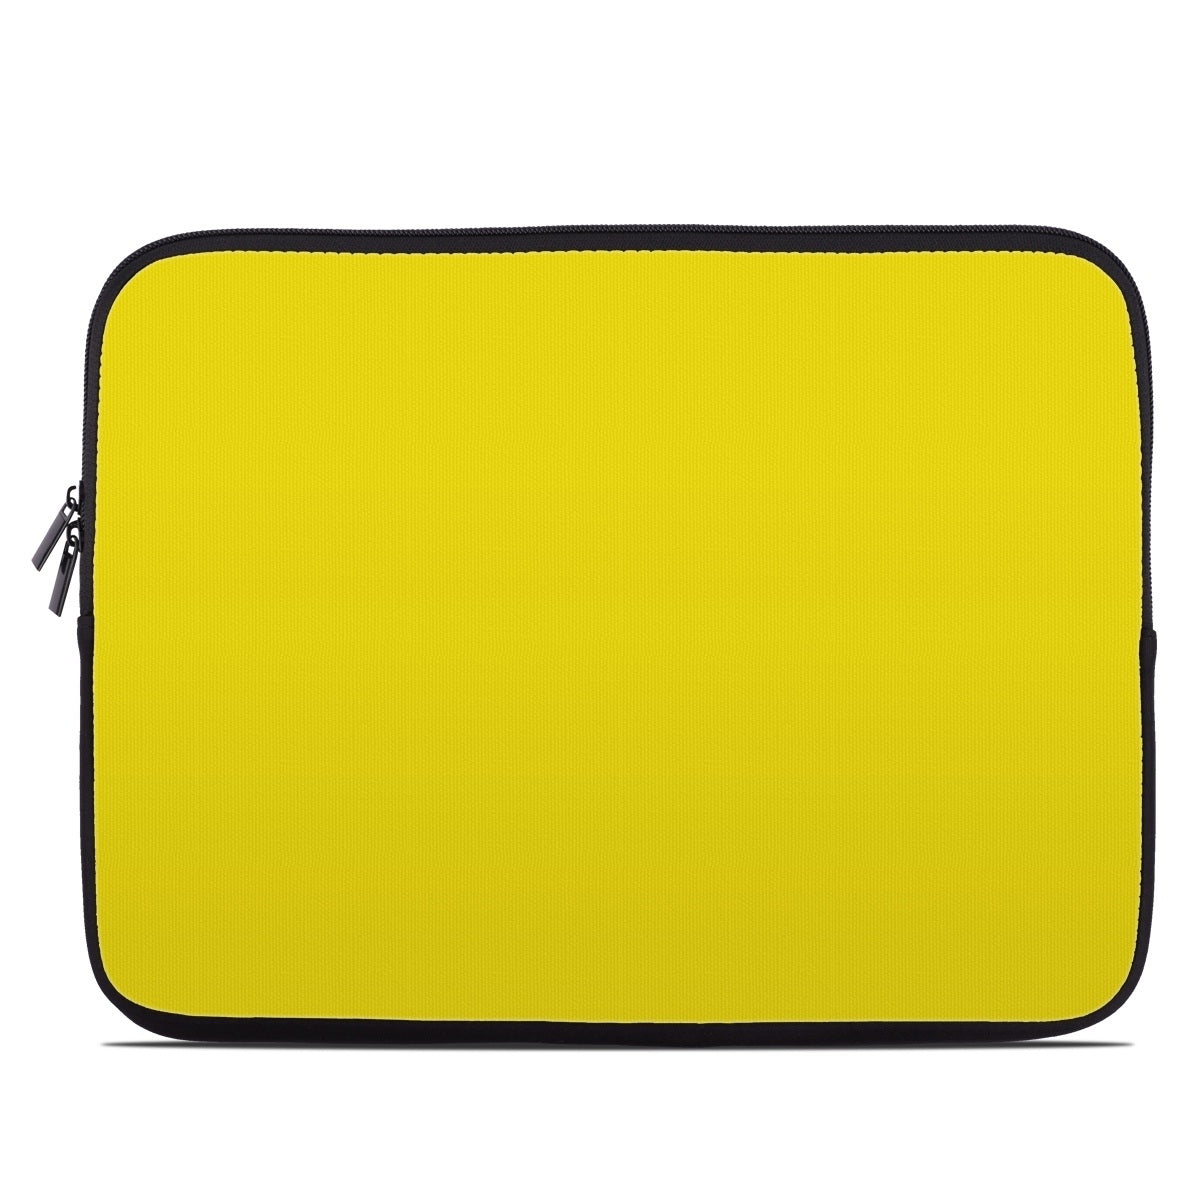 Solid State Yellow - Laptop Sleeve